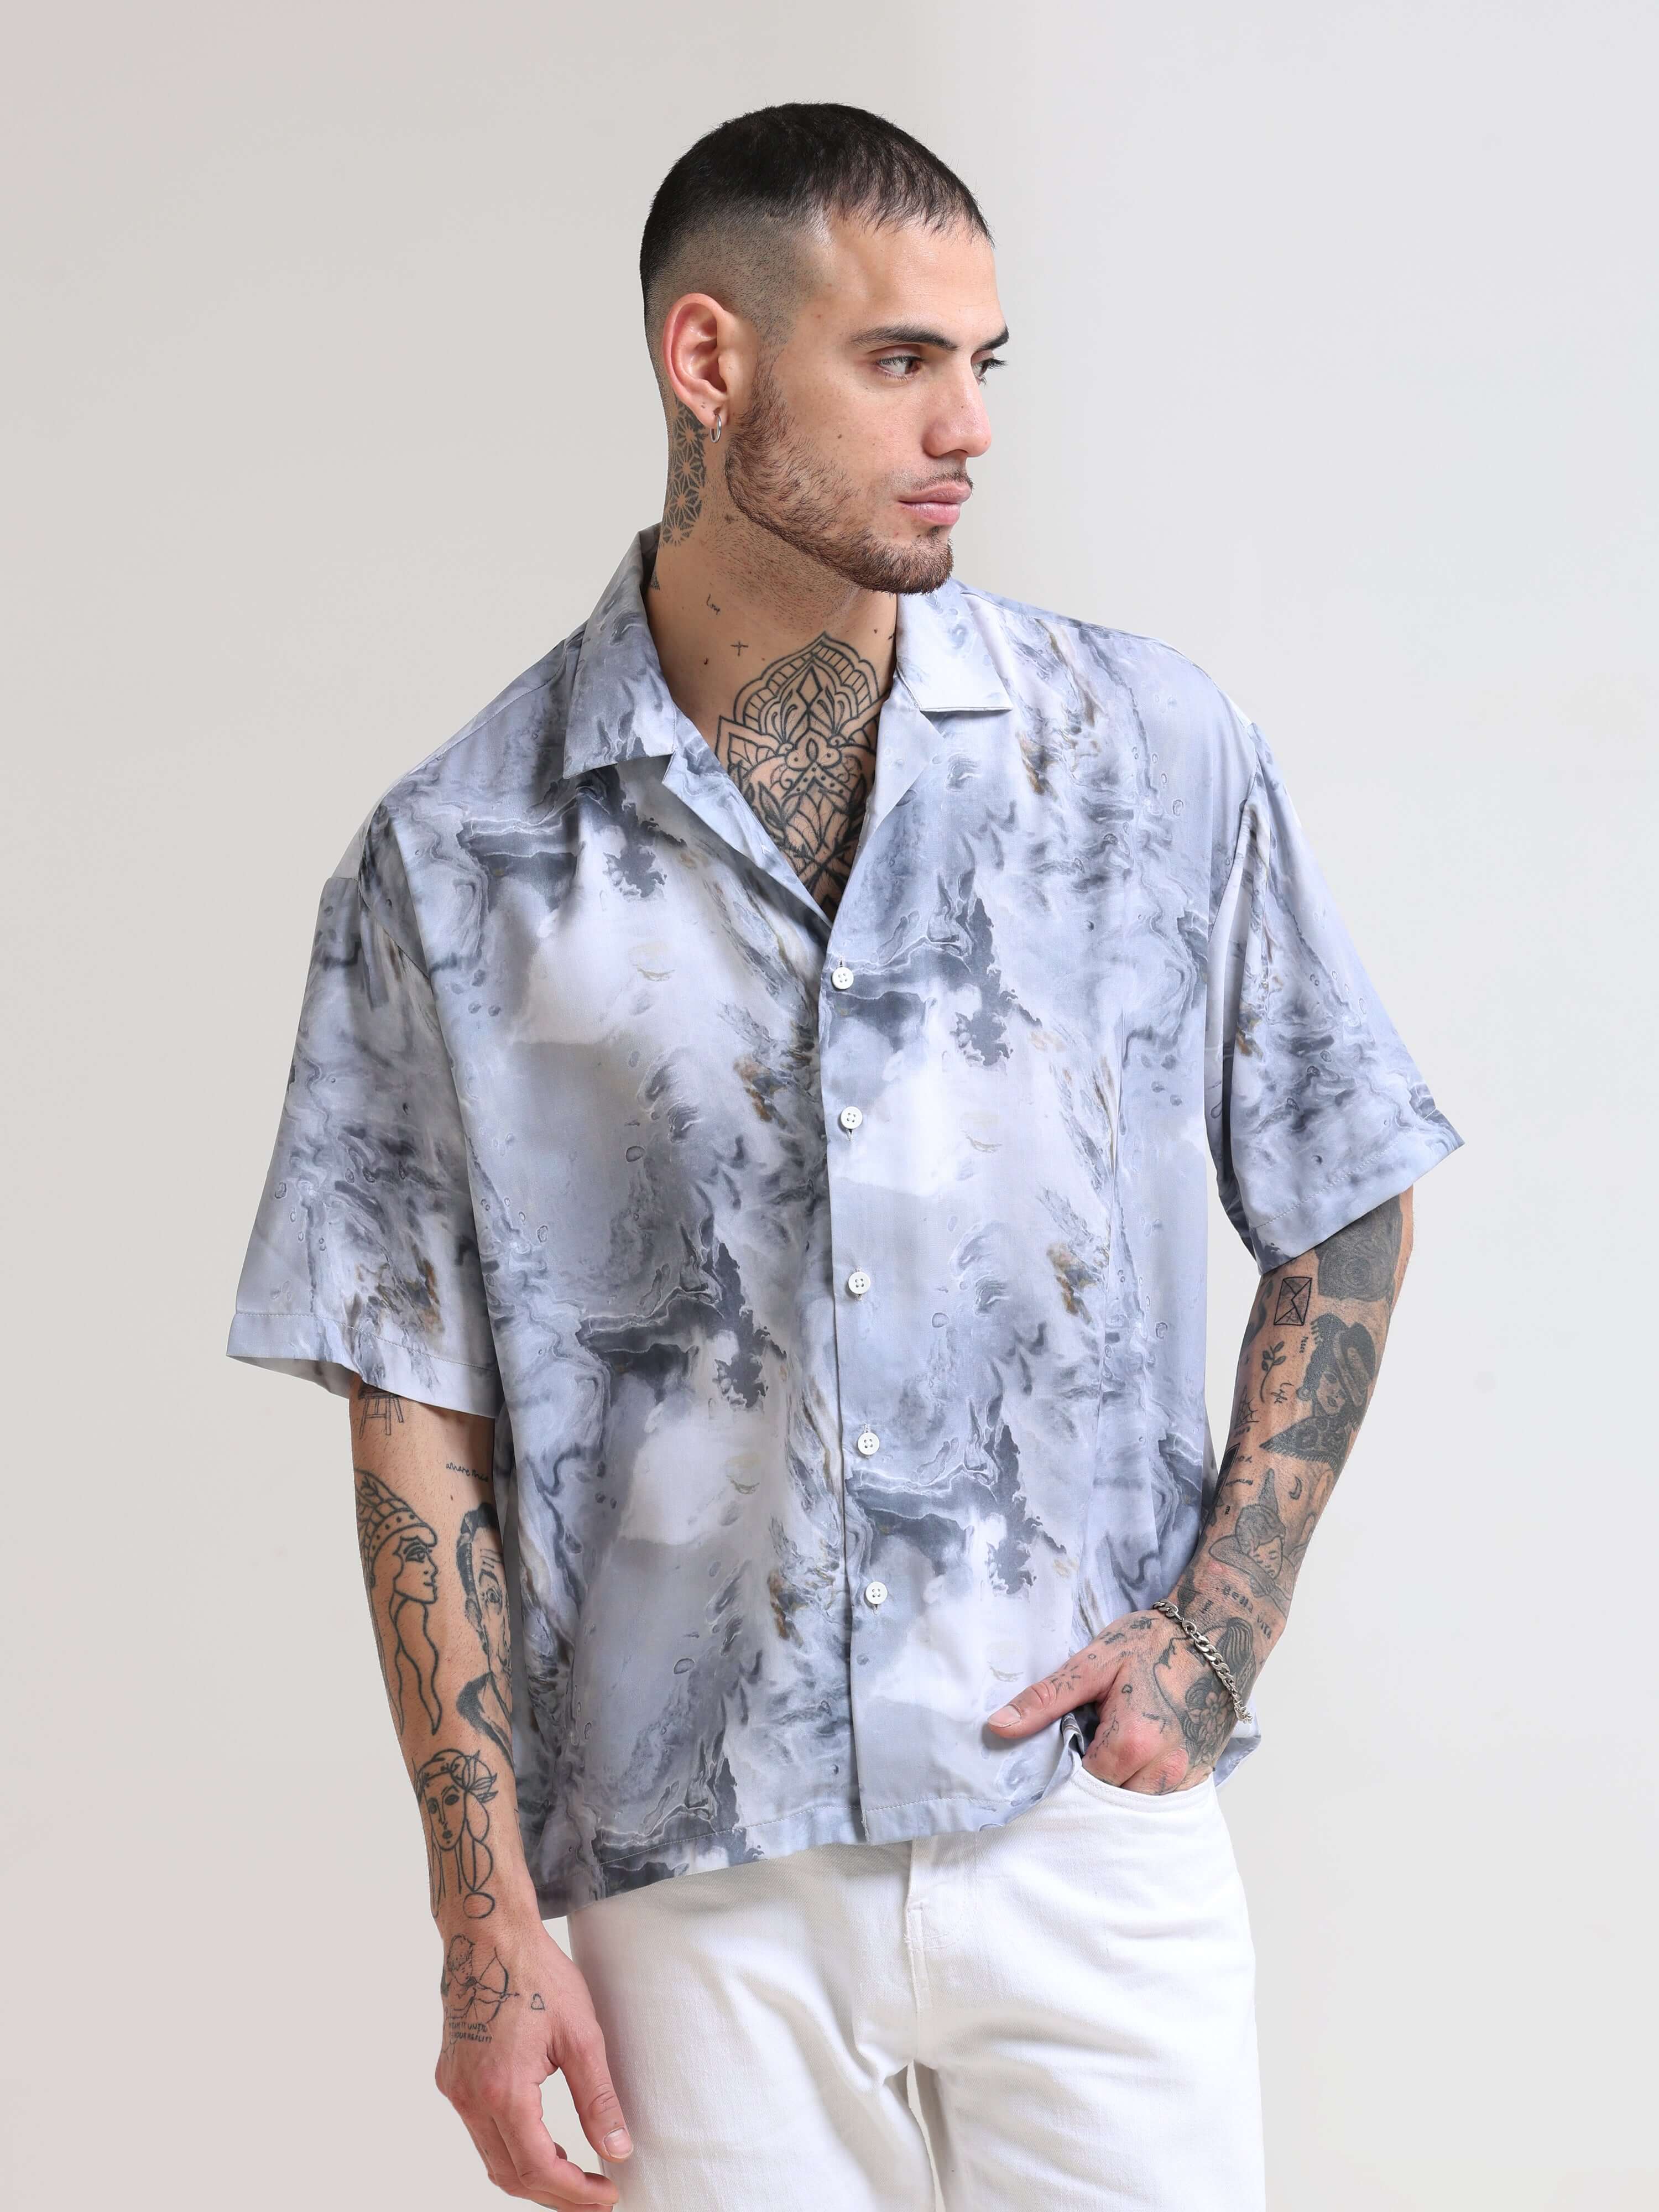 Marble Grey Oversized Shirt shop online at Estilocus. Our Marble Grey Oversized Shirt is perfect for those Hawaiian days. The relaxed fit and lightweight fabric make it comfortable to wear all day. Its classic style is perfect for those summer streetwear